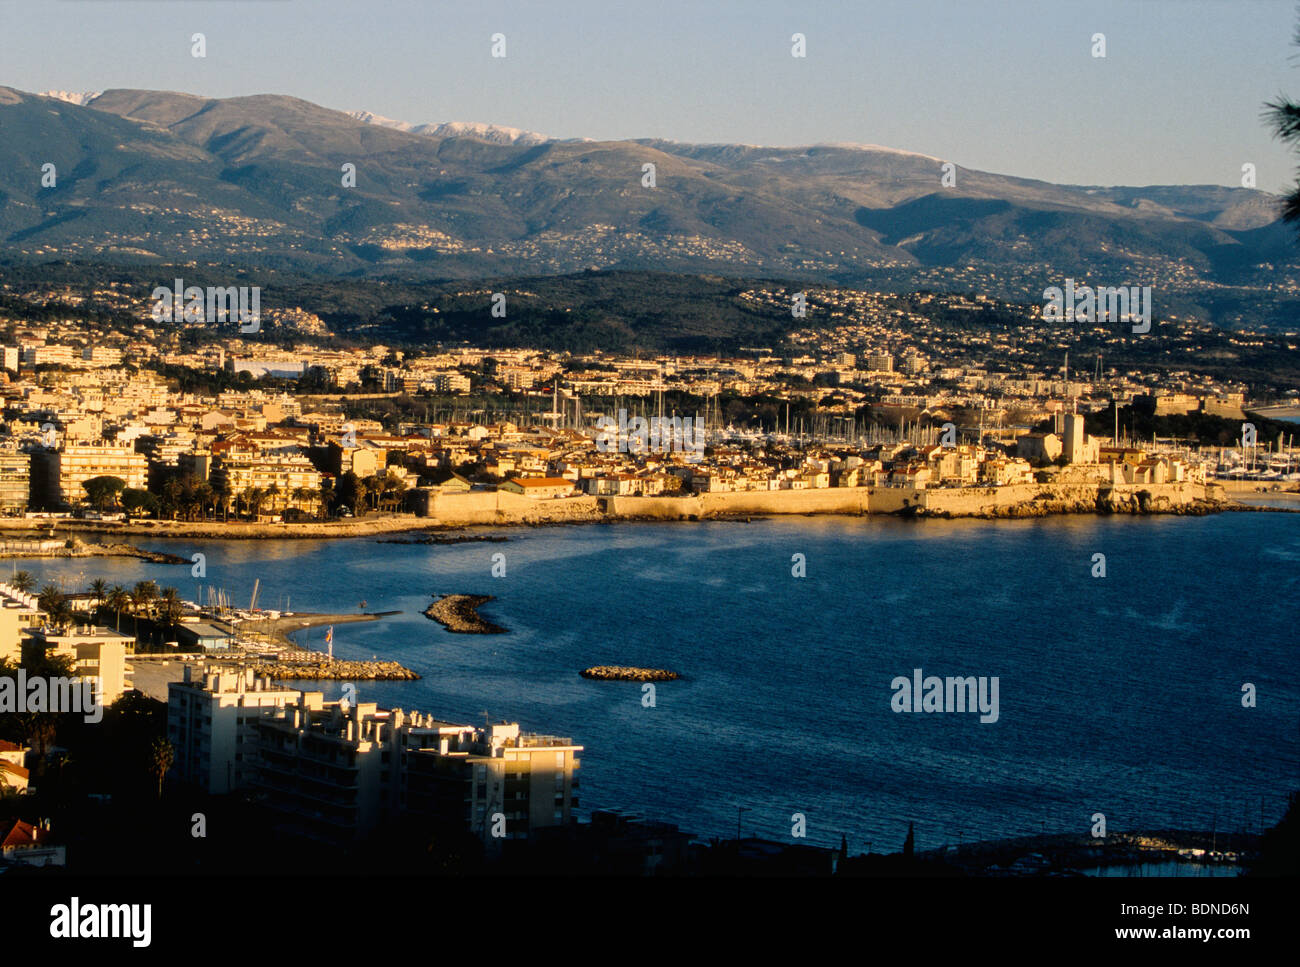 Antibes Alpes-MAritimes 06 PACA Cote d'azur French Riviera France Europe Stock Photo